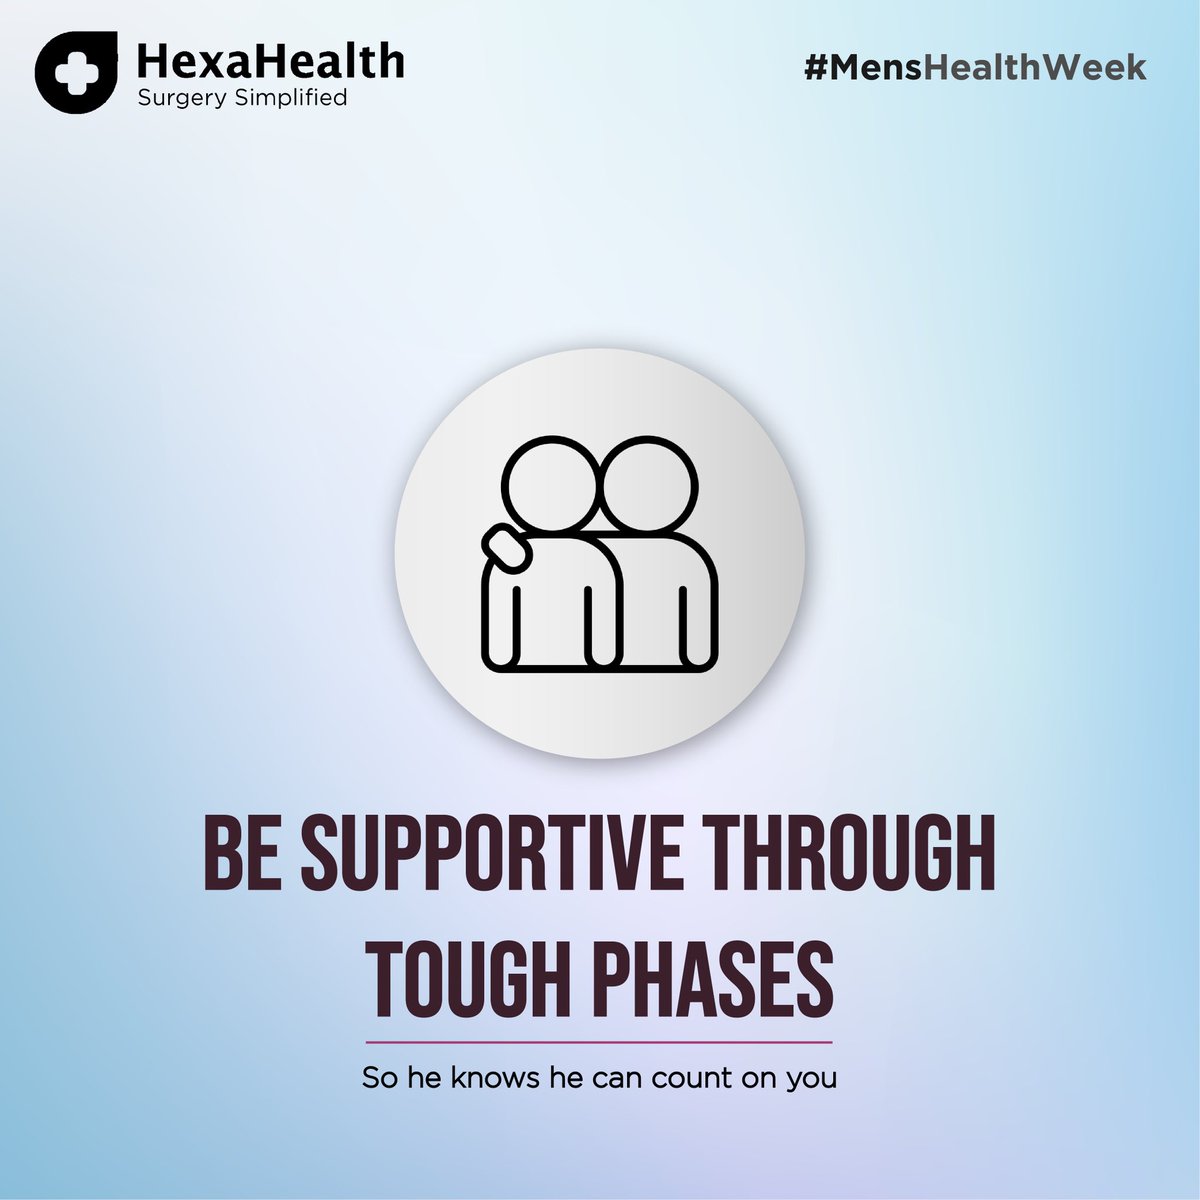 Let’s not forget they need emotional sustenance too. This #MensHealthWeek, make that extra effort! 

#HexaHealth #WeCARE #HealthyLife #FamilyHealth #surgery #surgeons #bestsurgeons #MensHealthWeek #emotionalhealth #emotions #emotionaltrauma #bepositive #besupportive